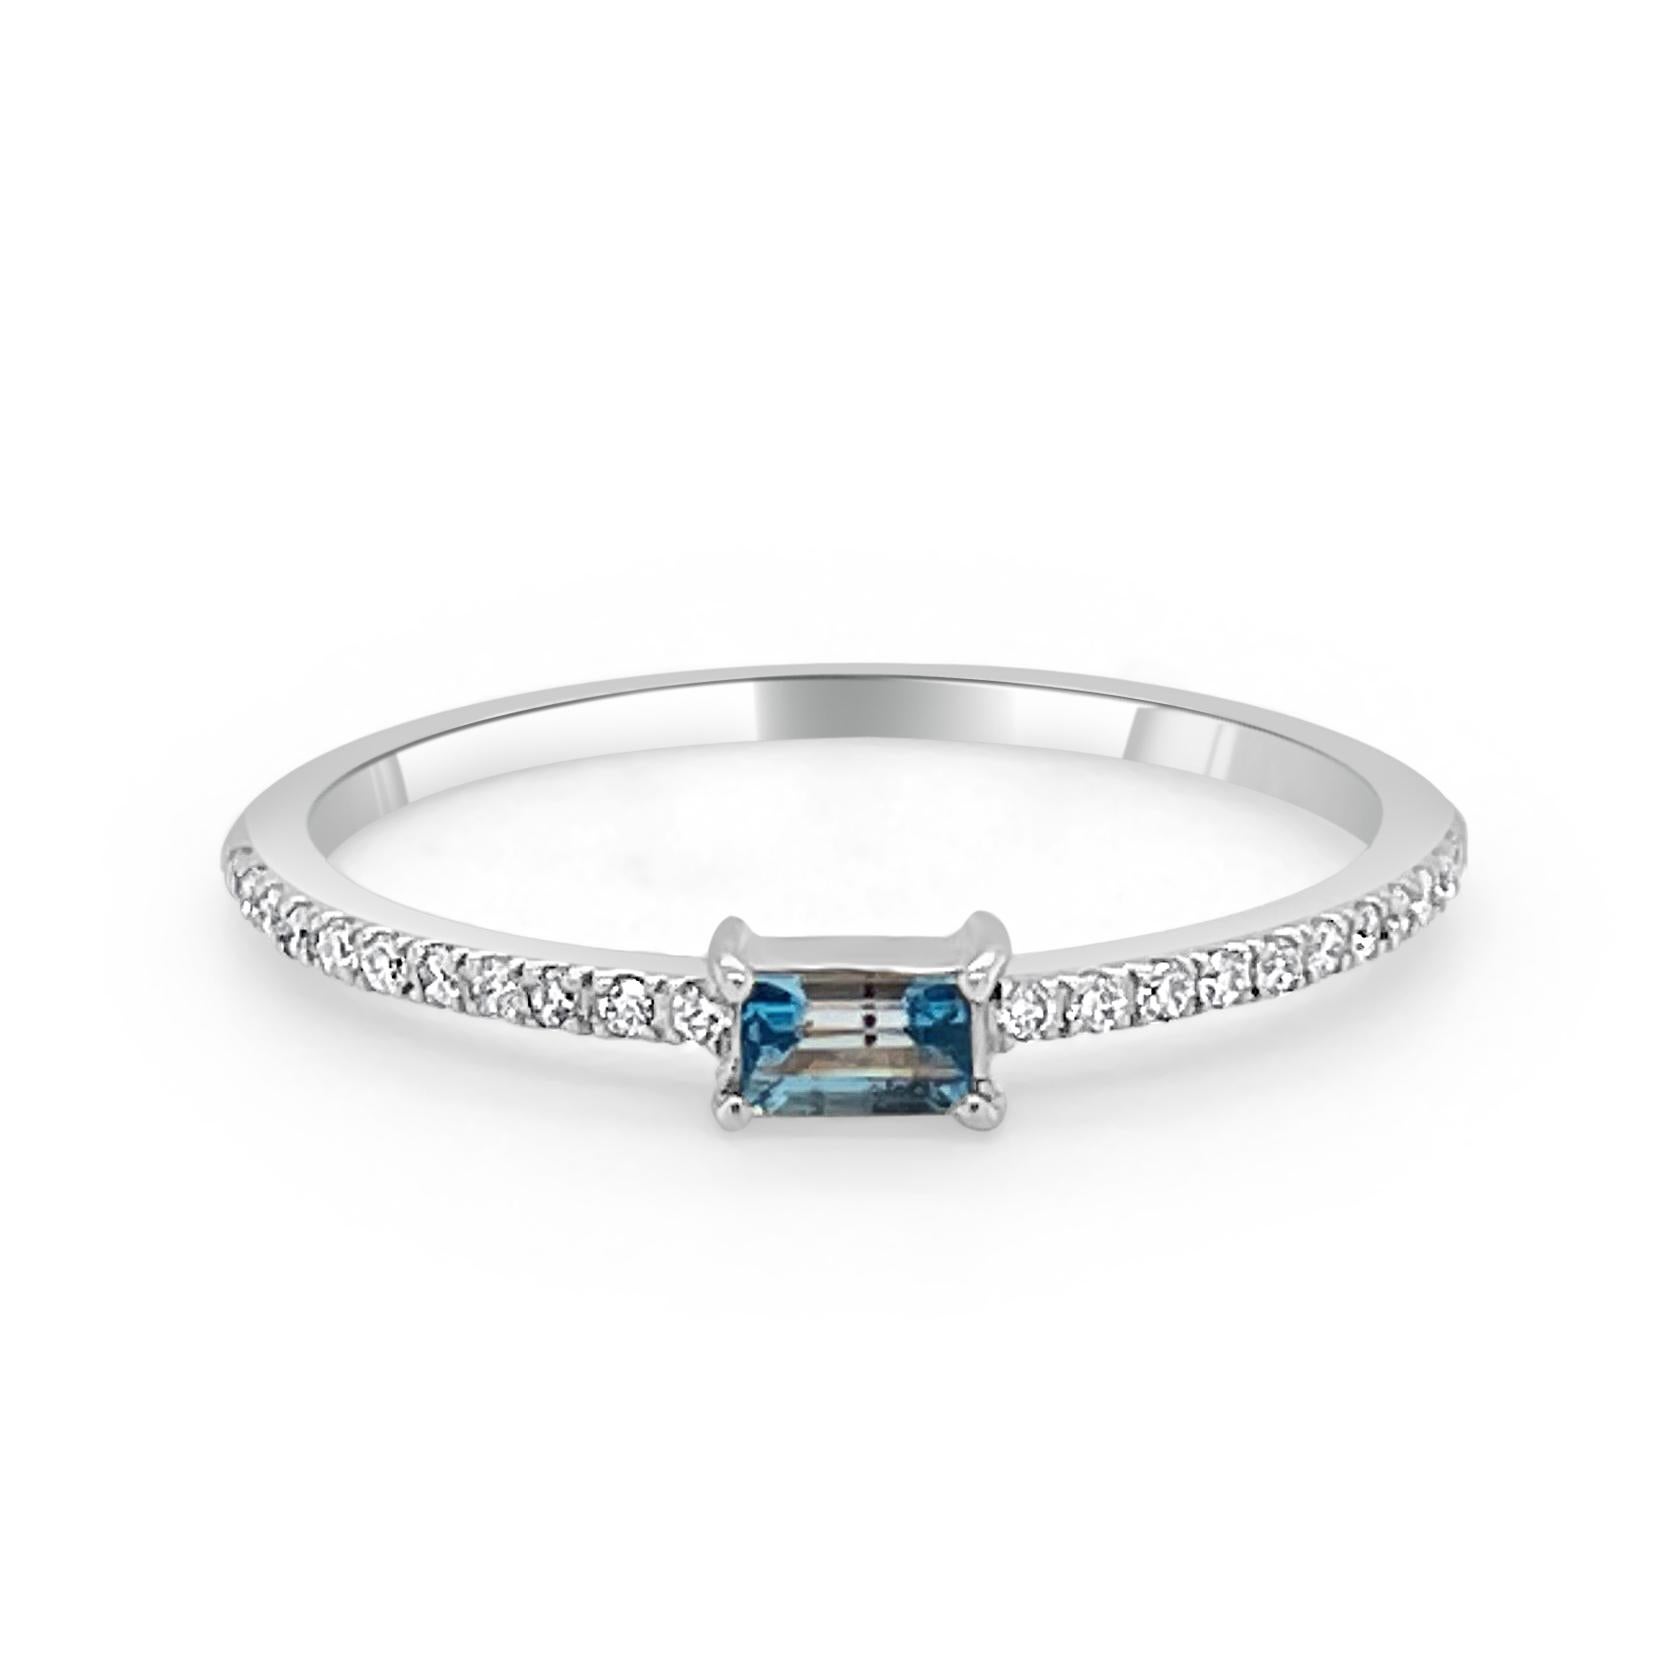 Charming and Elusive Design - This stackable ring features a 14k gold band, a baguette shaped gorgeous blue topaz approximately 0.16 ct, and round diamonds approximately 0.09 ct. 
Measurements for ring size: The finger Size of the ring is 6.5 and